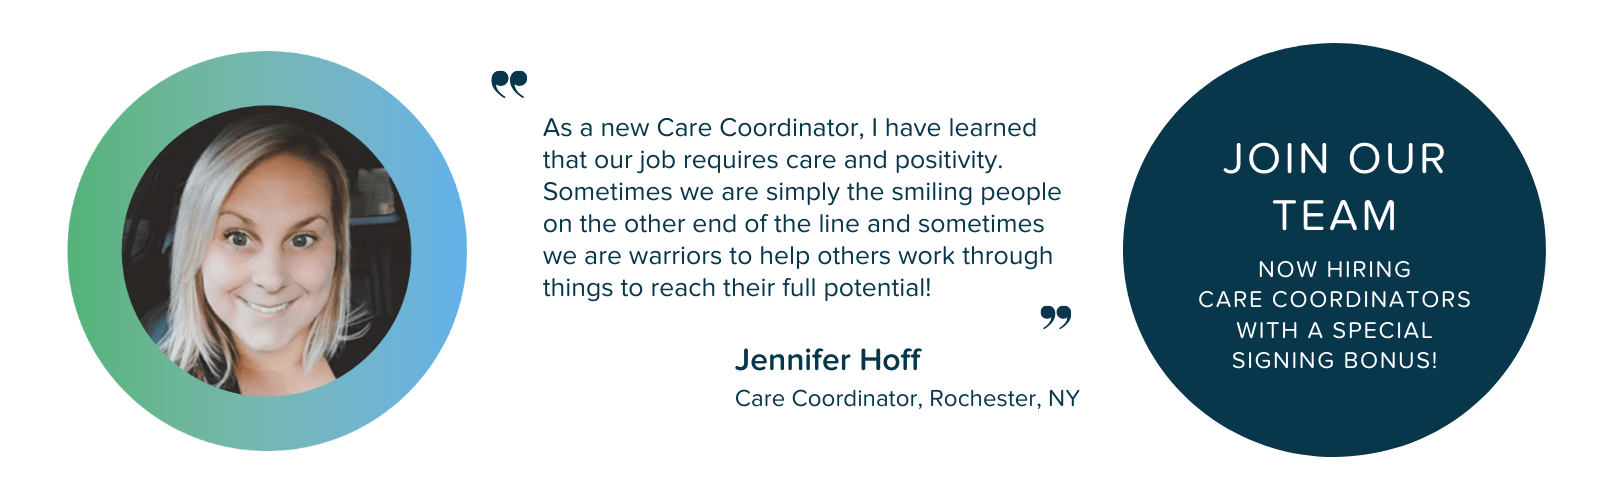 "As a new Care Coordinator, I have learned that our job requires care and positivity. Sometimes we are simply the smiling people on the other end of the line and sometimes we are warriors to help others work through things to reach their full potential." - Jennifer Hoff, Care Coordinator, Rochester, NY. Join Our Team: Now Hiring Care Coordinators with a Special Signing Bonus!